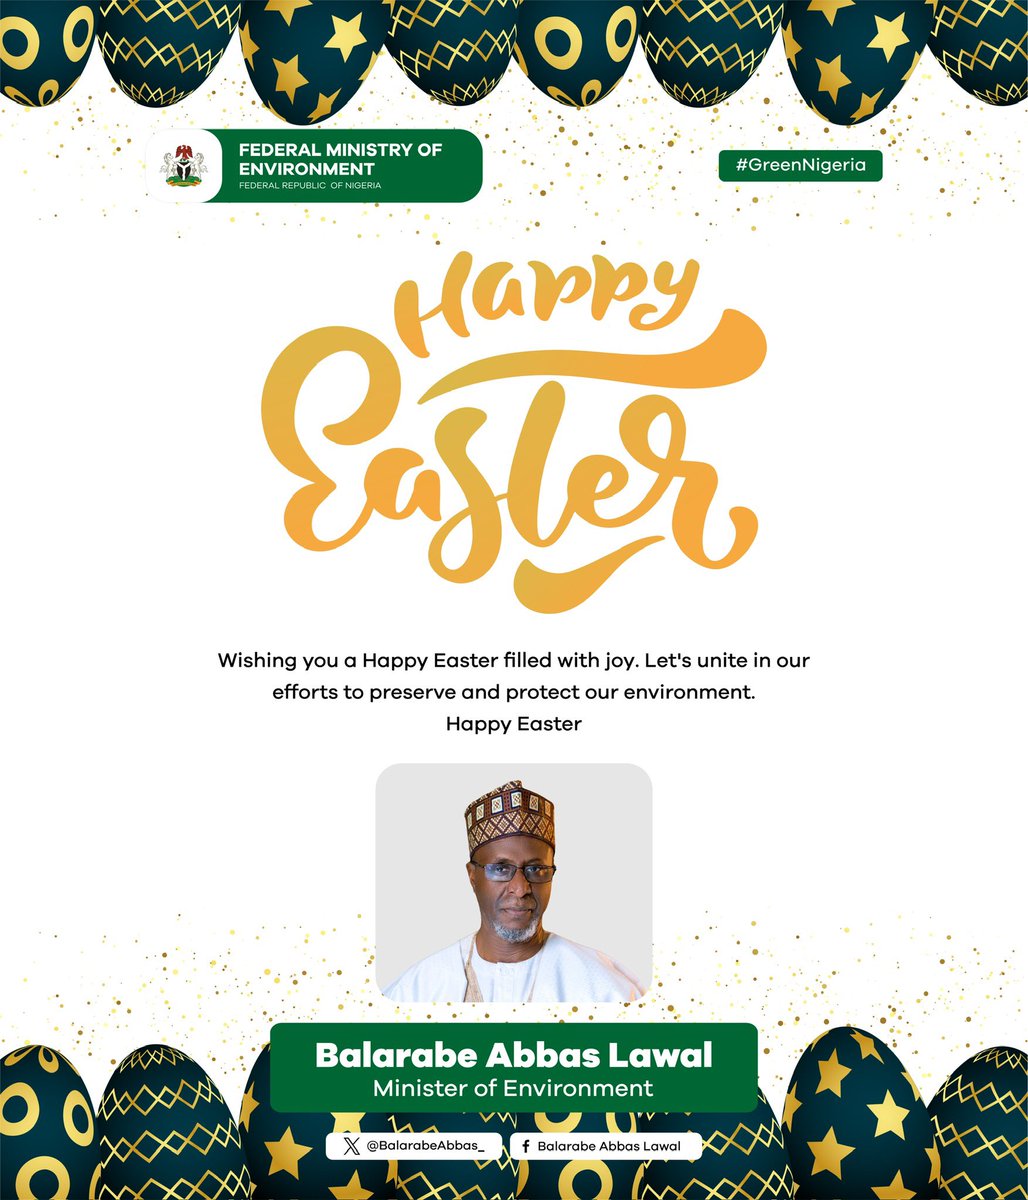 Happy Easter, fellow Nigerians and all celebrating all over the world. #GreenNigeria 🌿